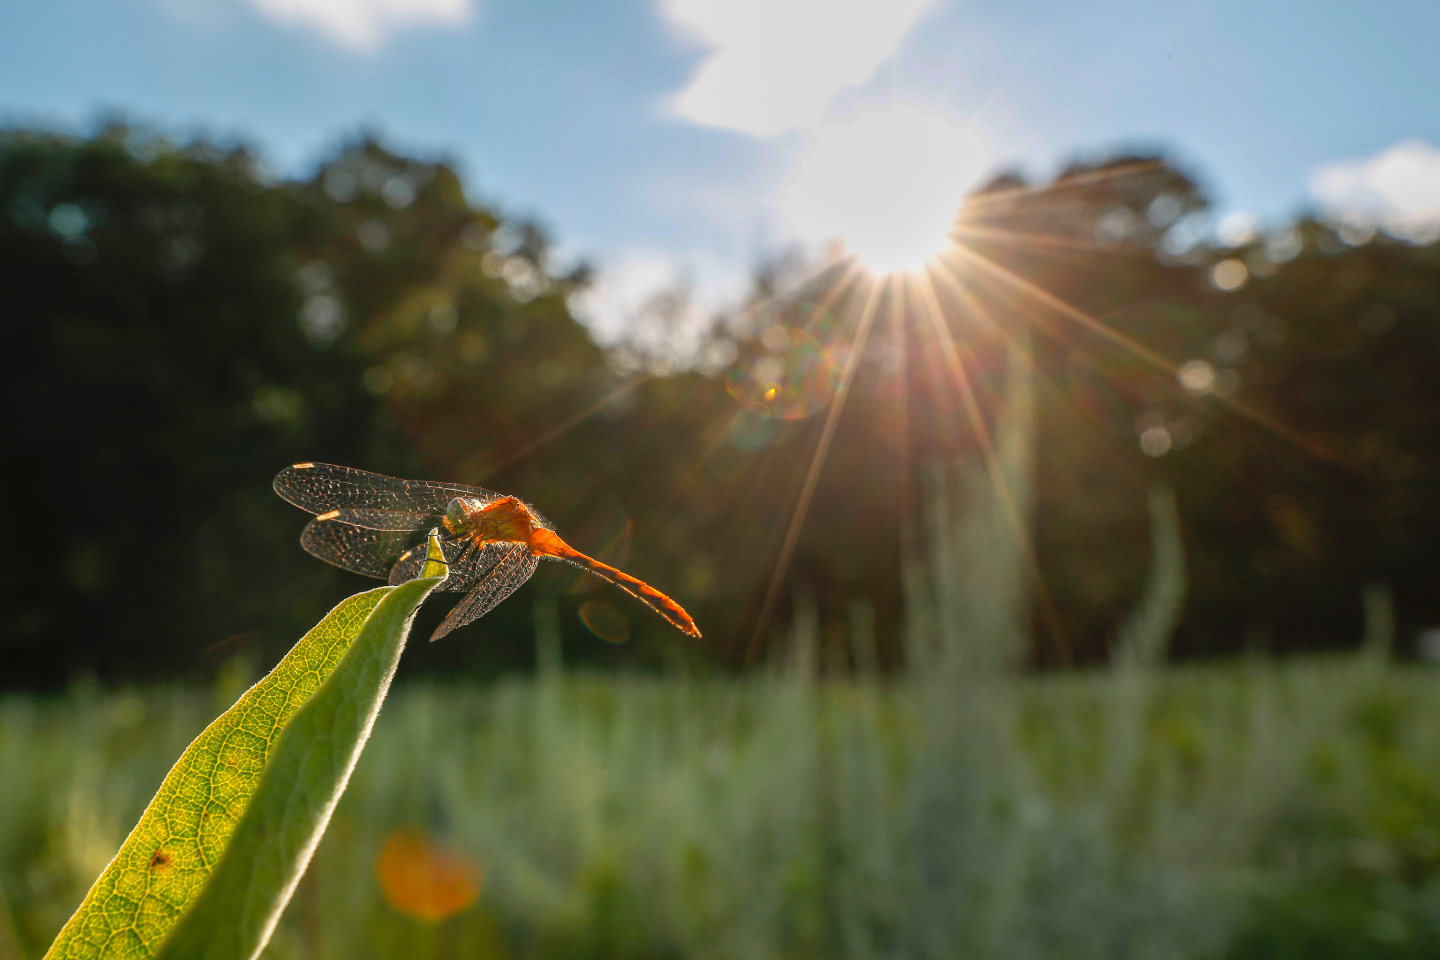 a dragonfly alights on a milkweed leaf i the foreground with sun going through trees in the background